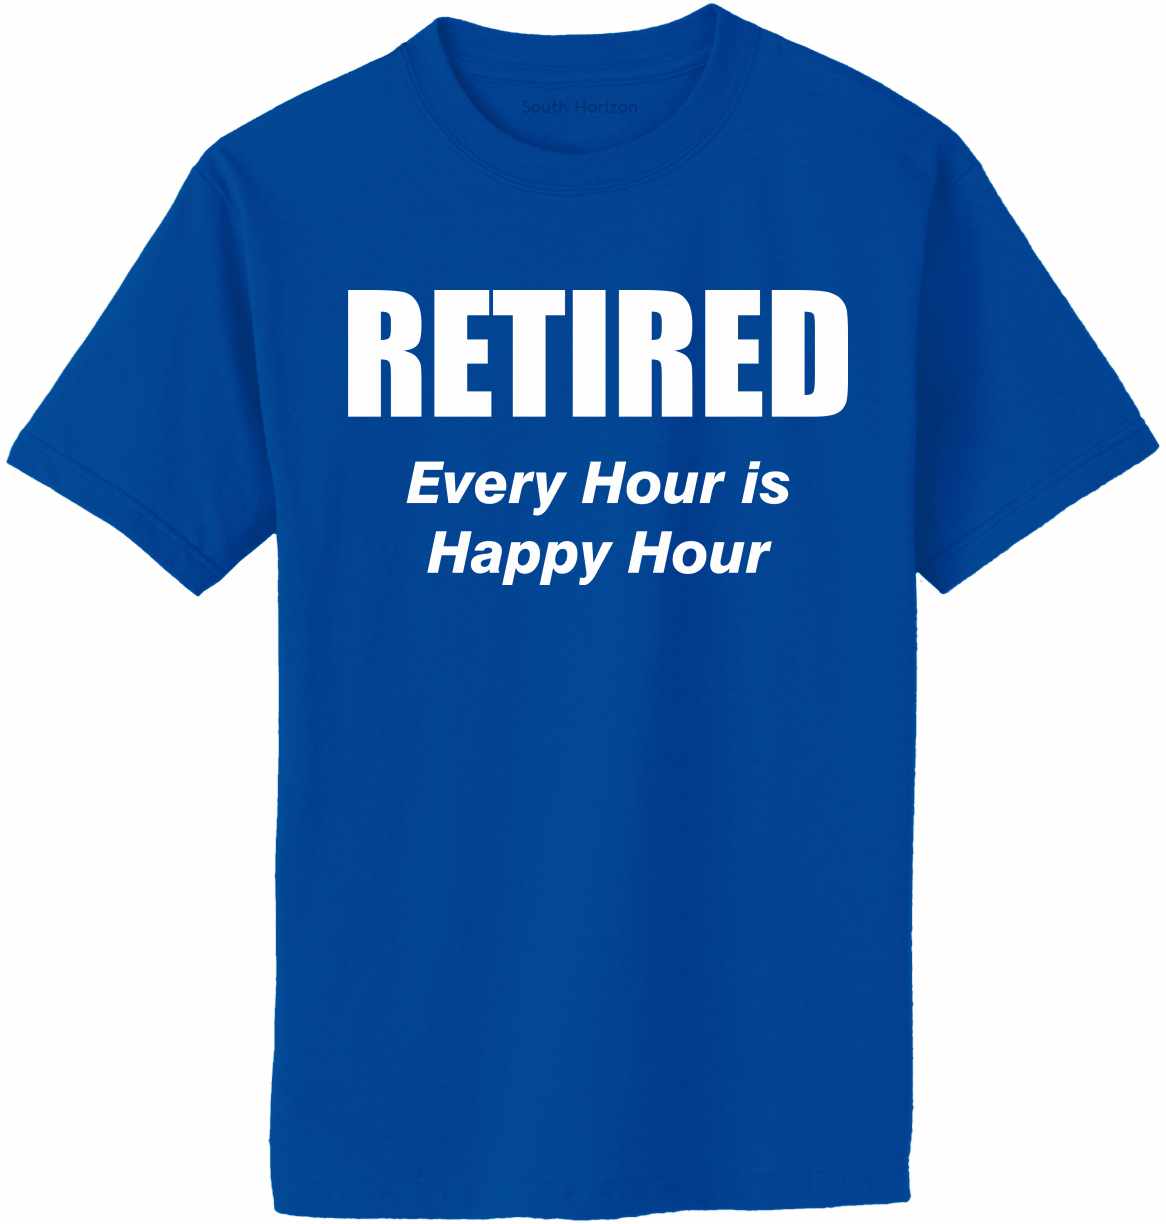 Retired, Every Hour Is Hour on Adult T-Shirt in 17 colors – South Horizon T-Shirt Company